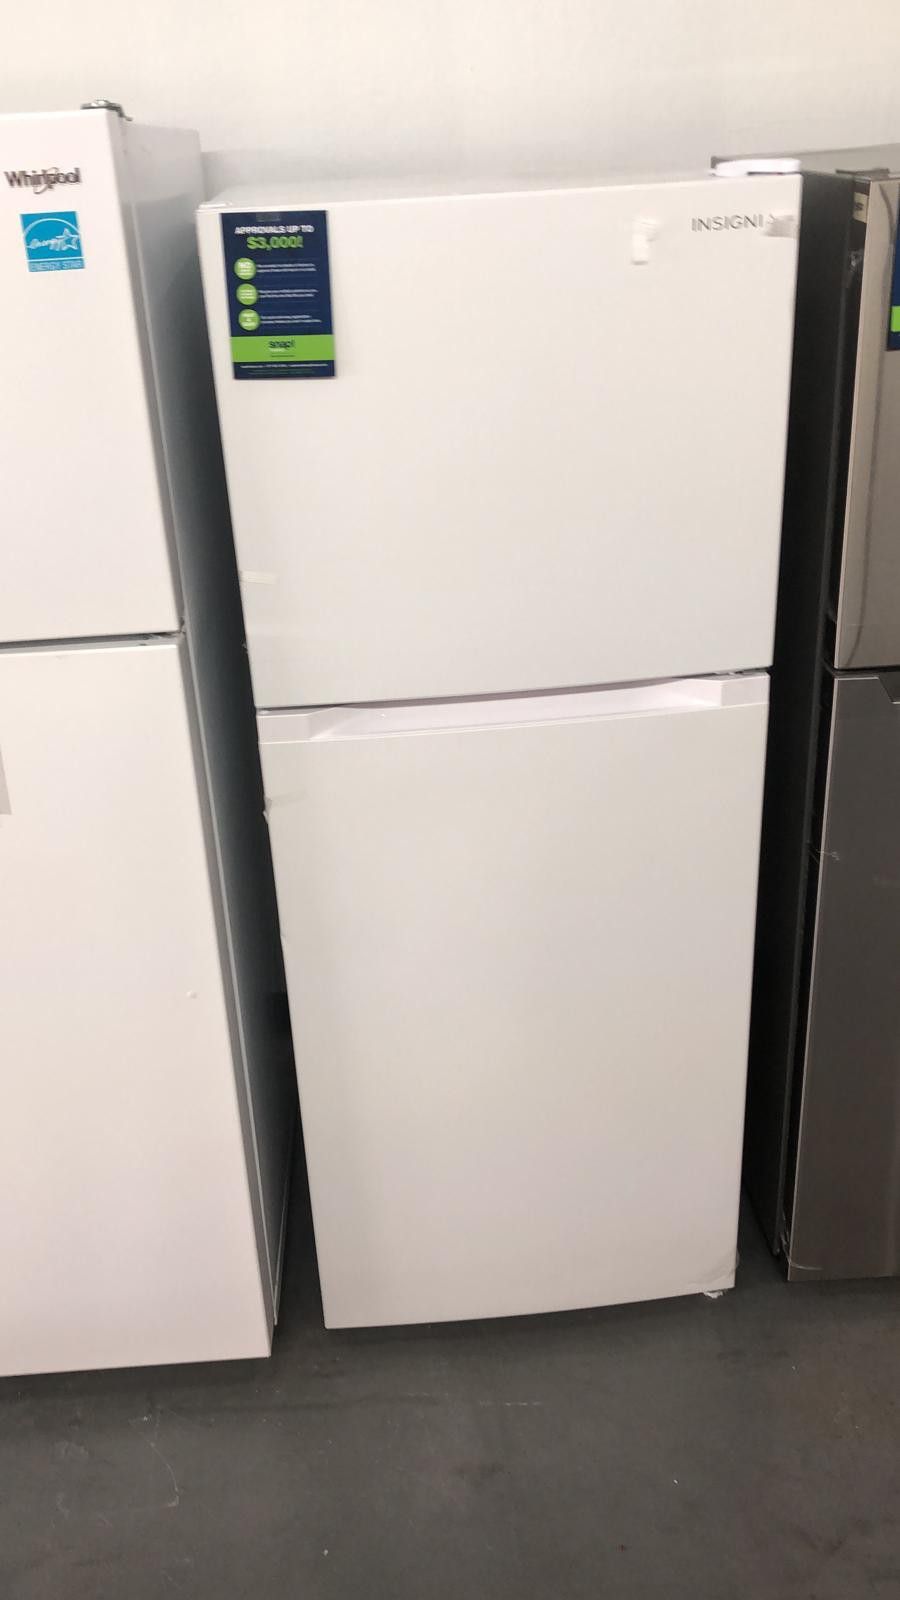 New Insignia Top Freezer Refrigerator - White / Different capacities Available